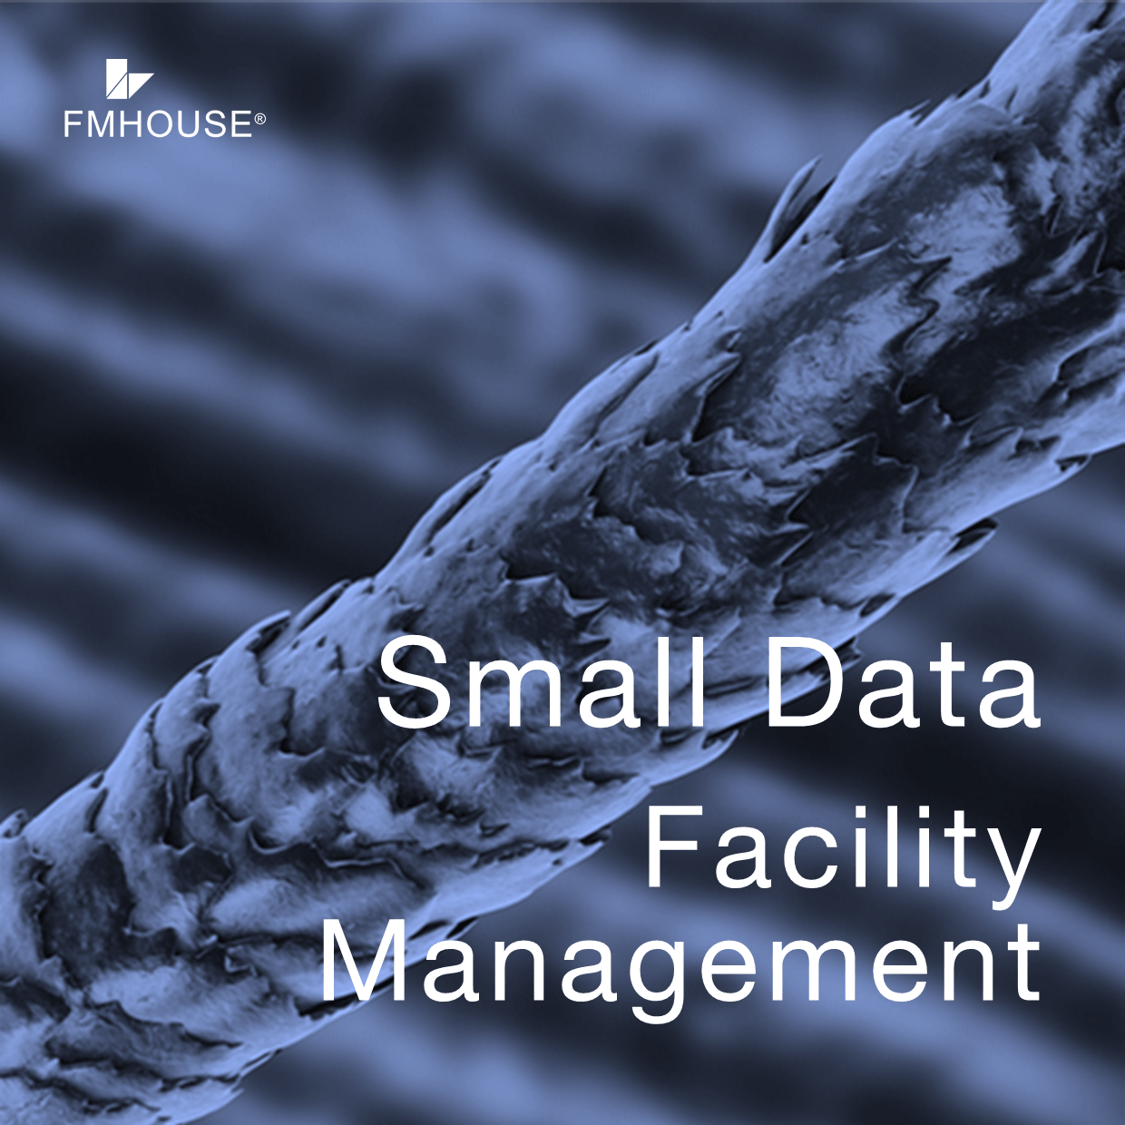 Small Data Facility Management